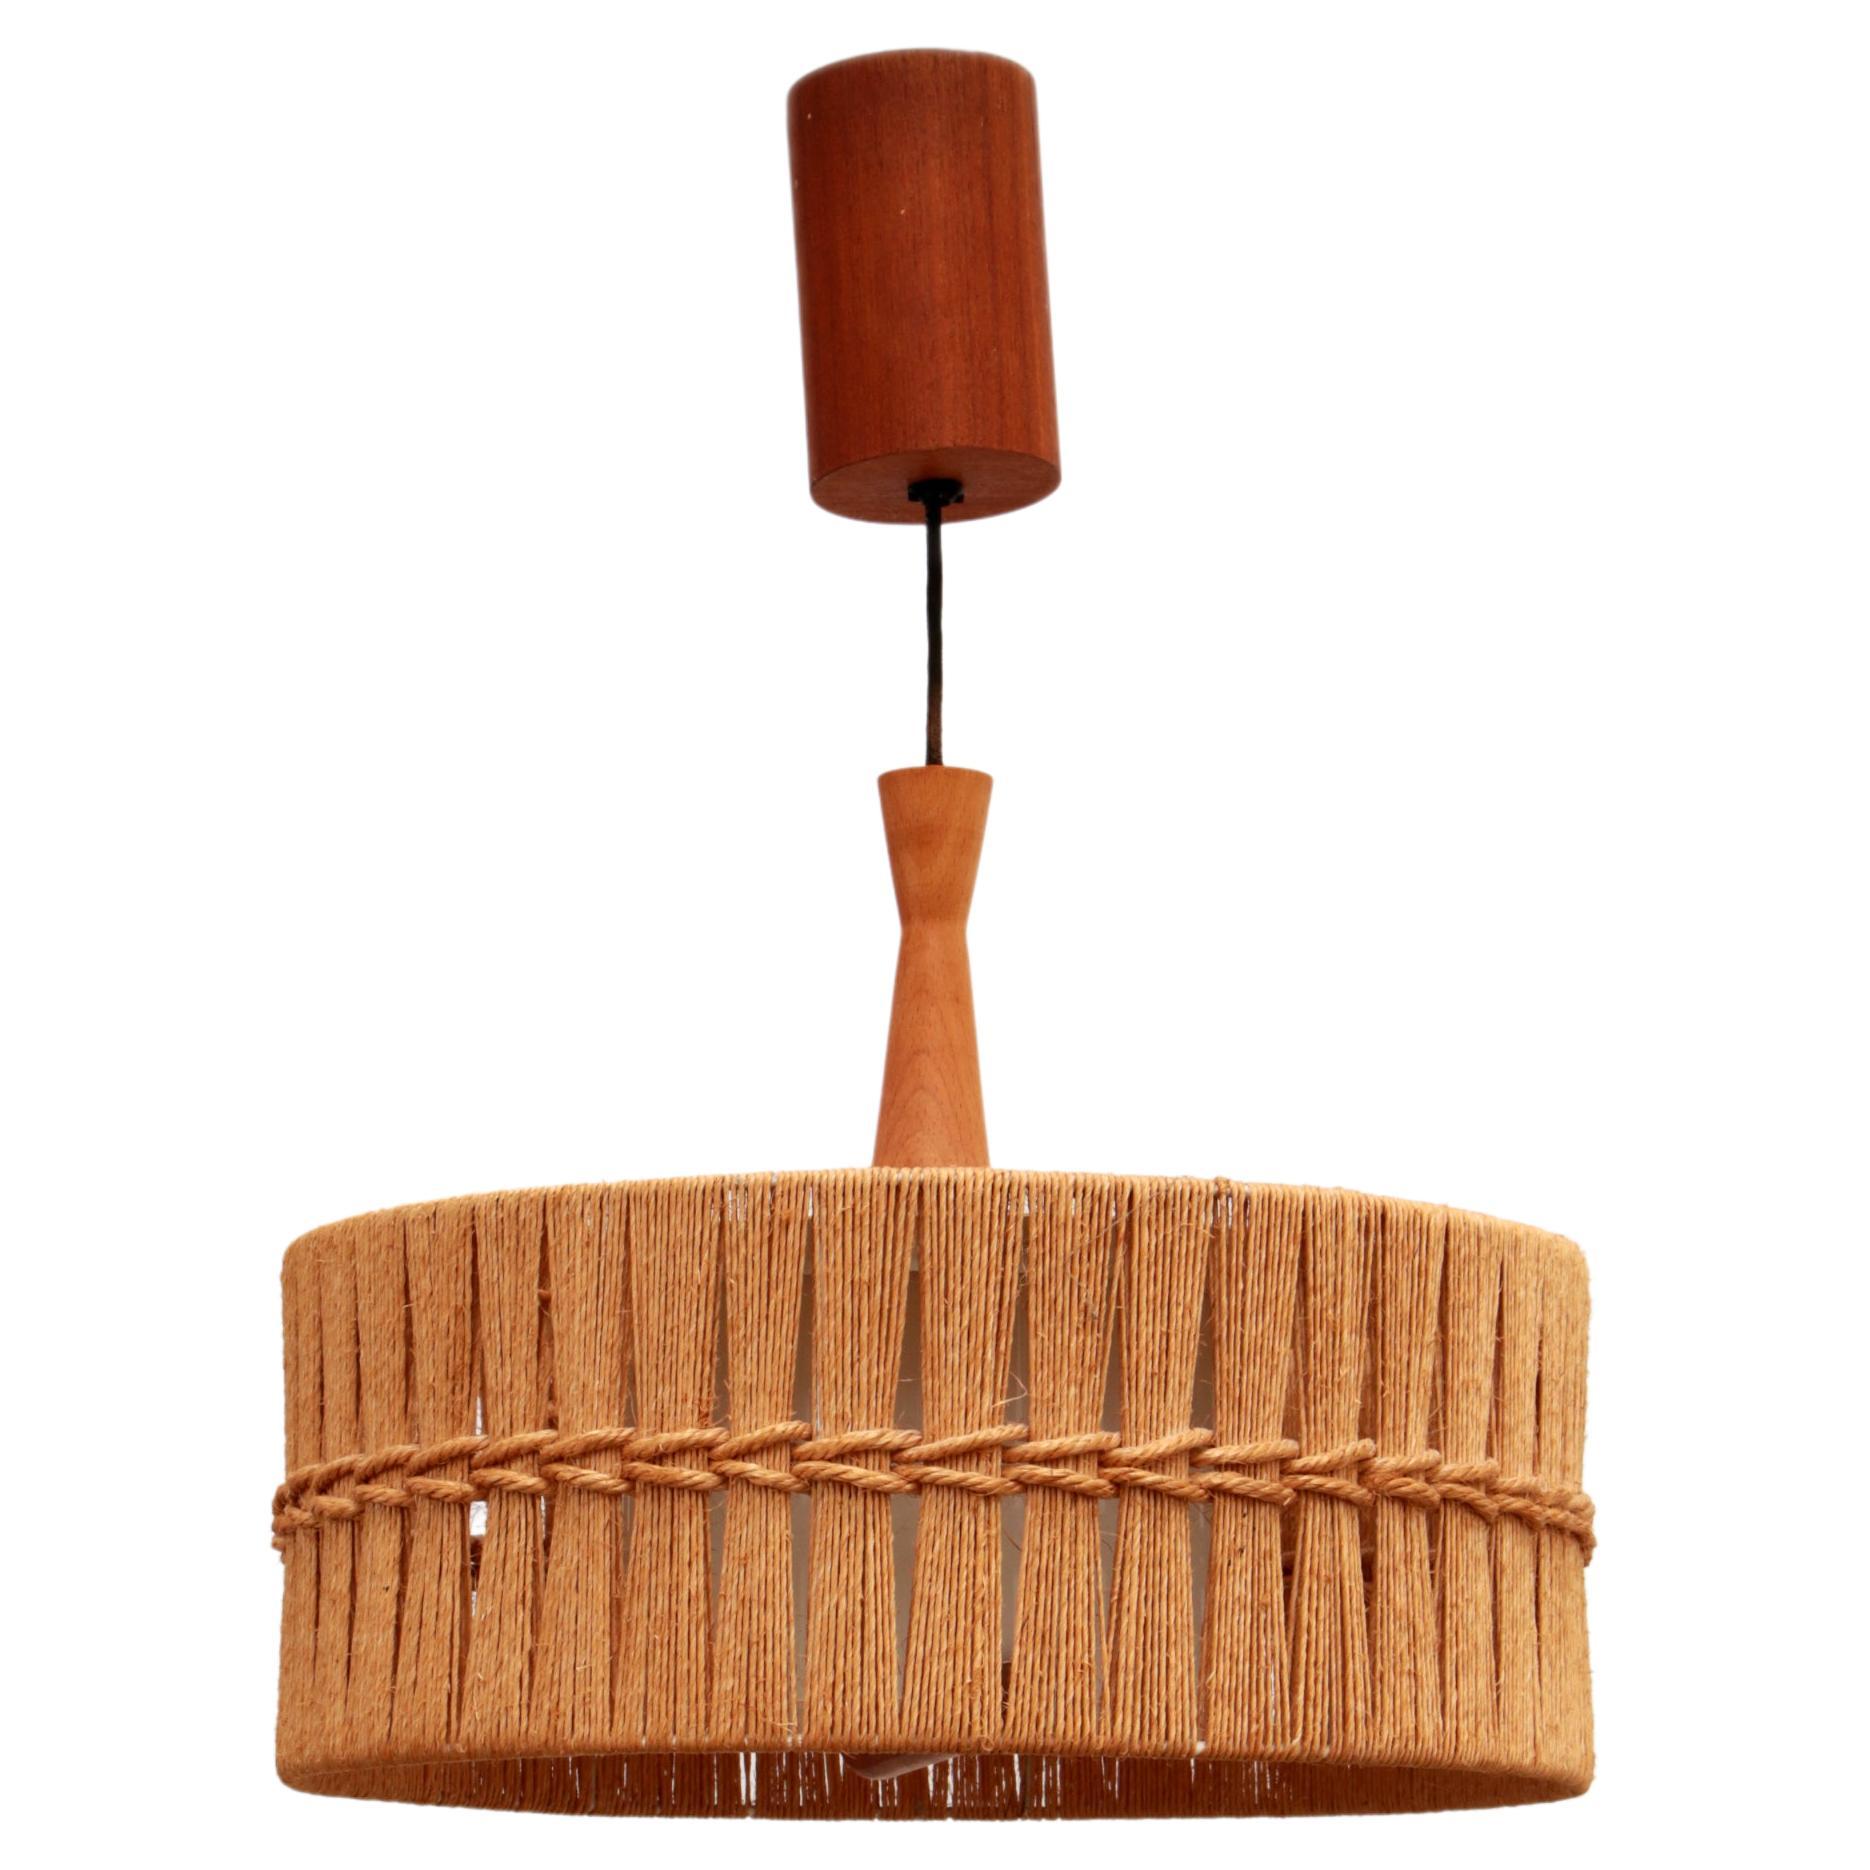 Vintage Temde Hanging Lamp with Teak and Raffia 1960s Germany